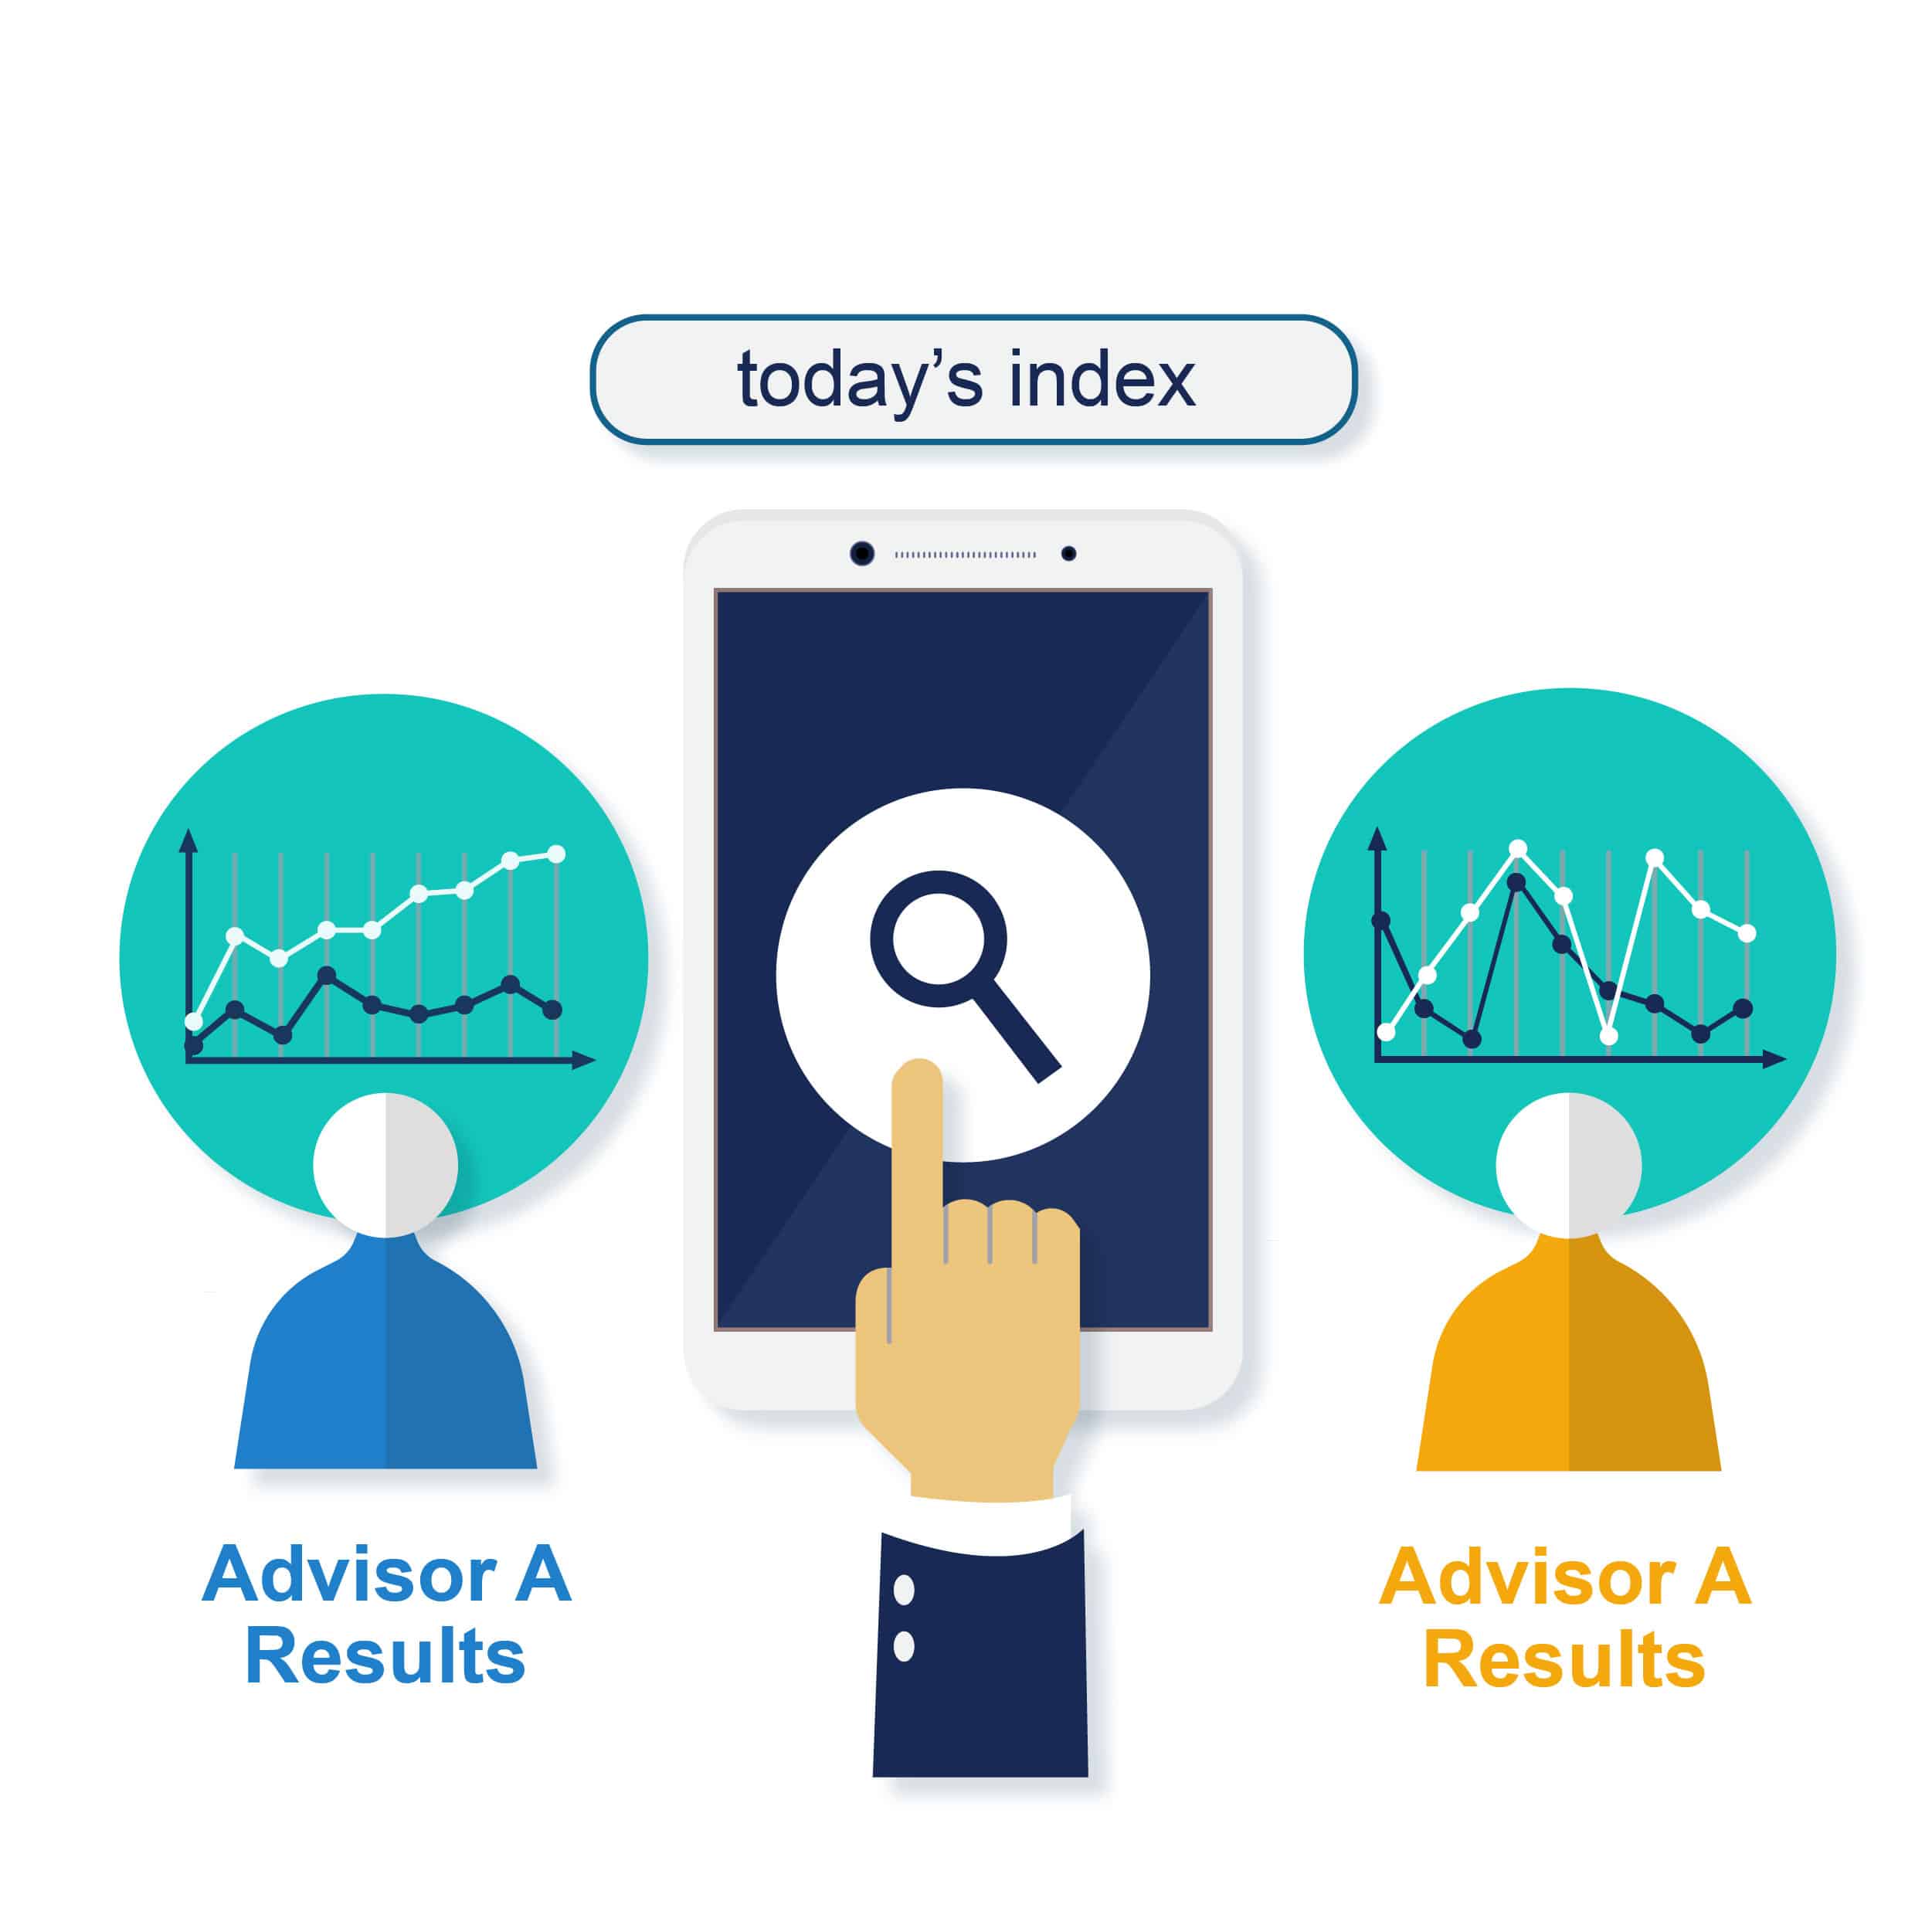 advisors receiving different results from same search